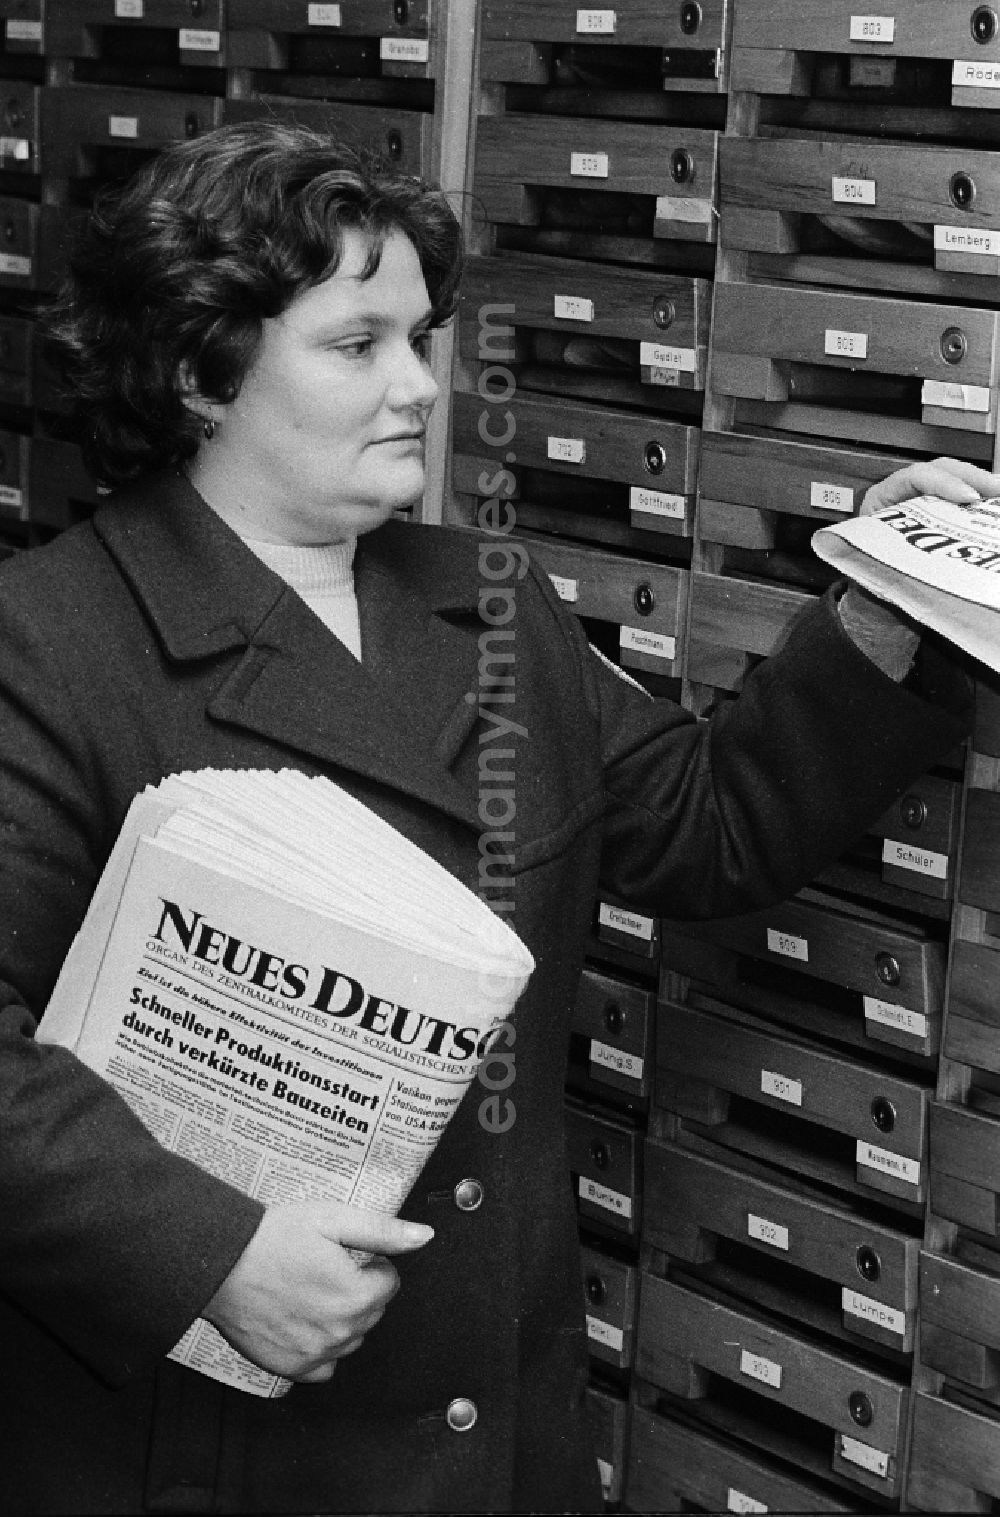 GDR picture archive: Berlin - A postal woman puts the everyday newspaper Neues Deutschland in mailbox of a block of flats in Berlin, the former capital of the GDR, German democratic republic